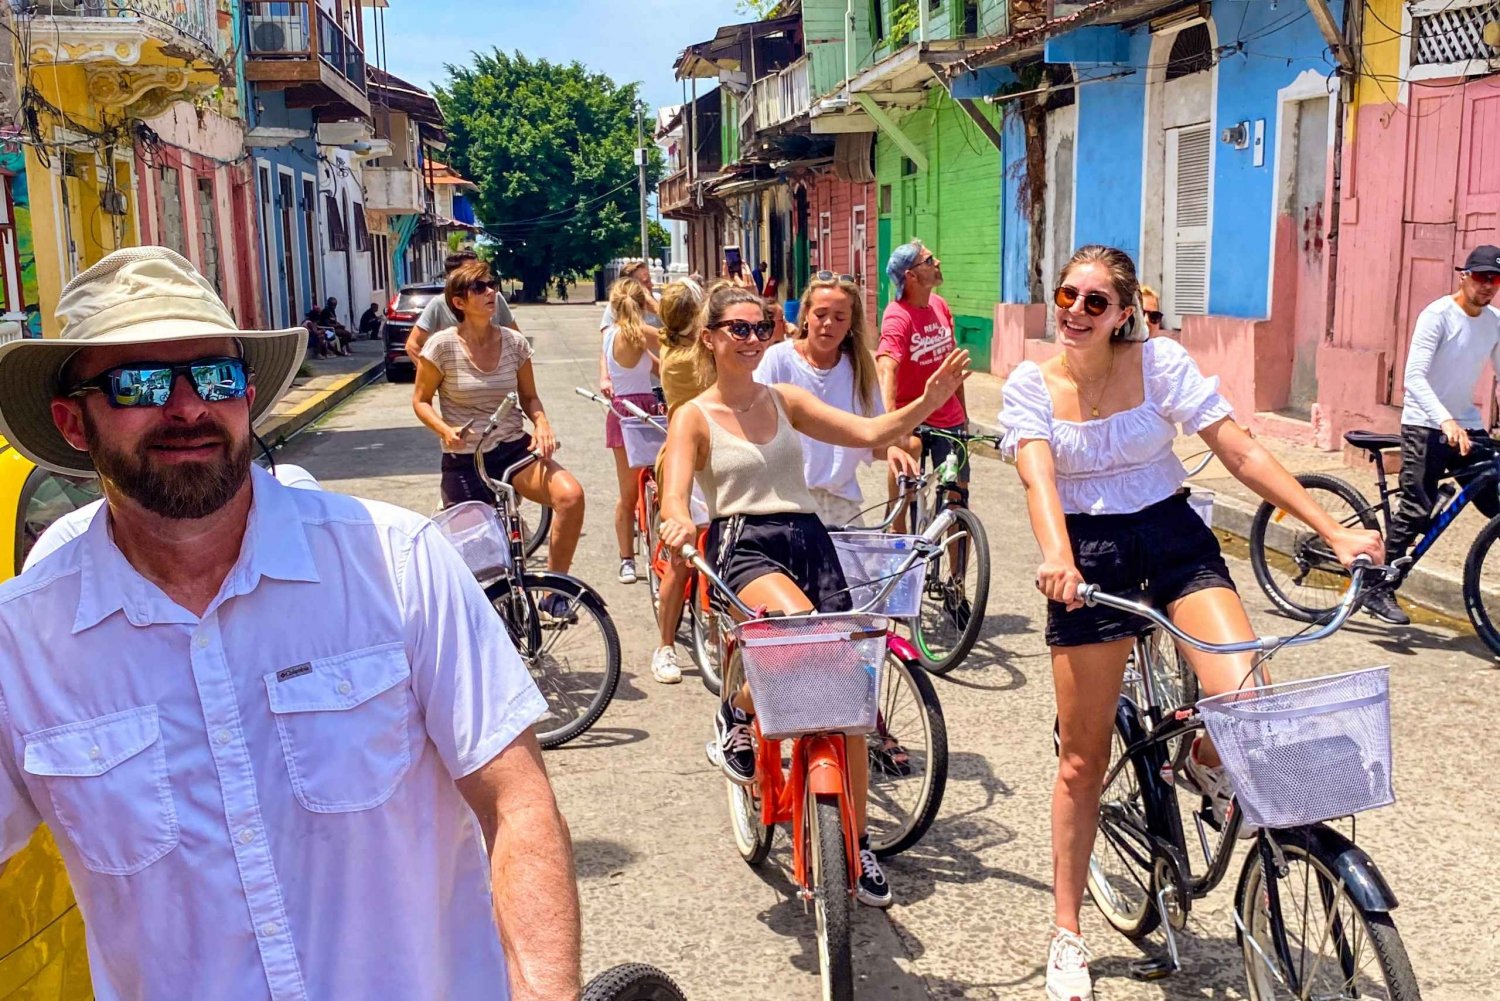 Highlights Bike Tour Panama City With Professional Guide